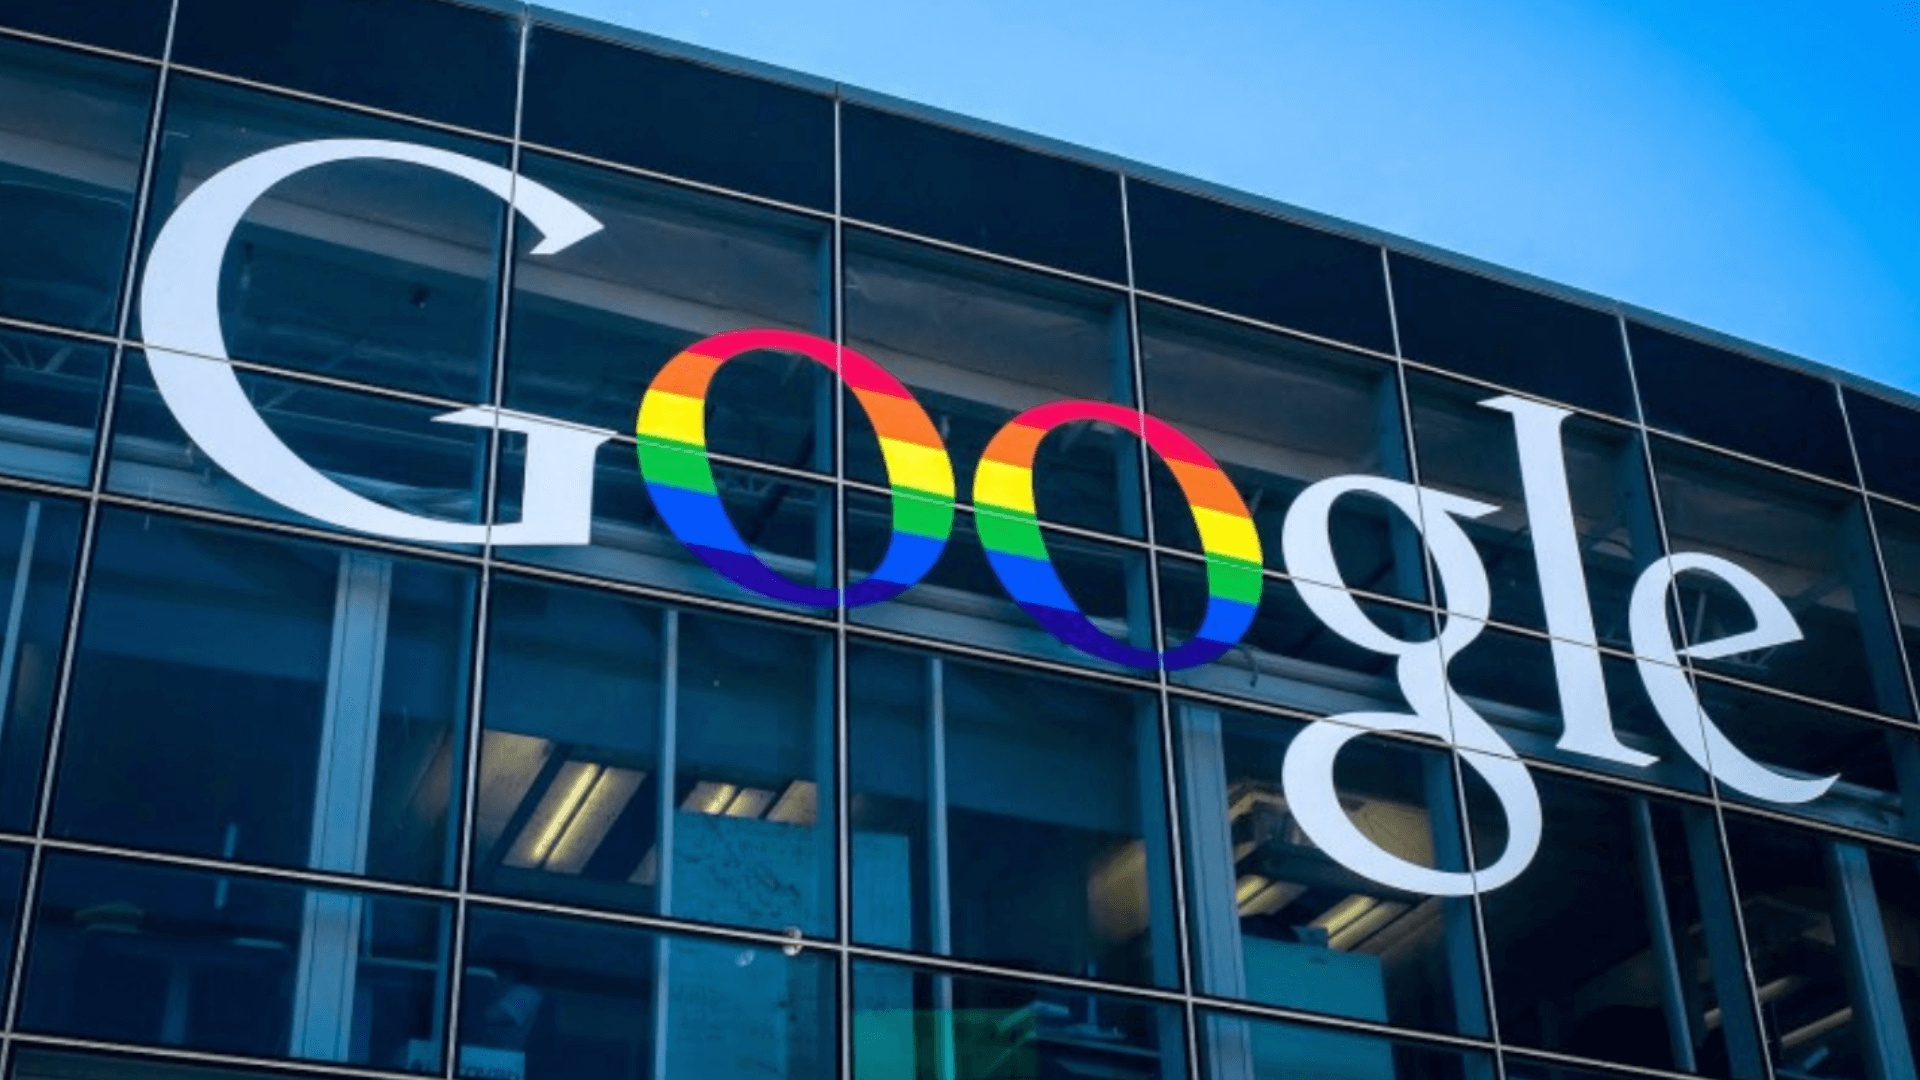 Google finally pulls conversion therapy app from store after 140,000 sign petition